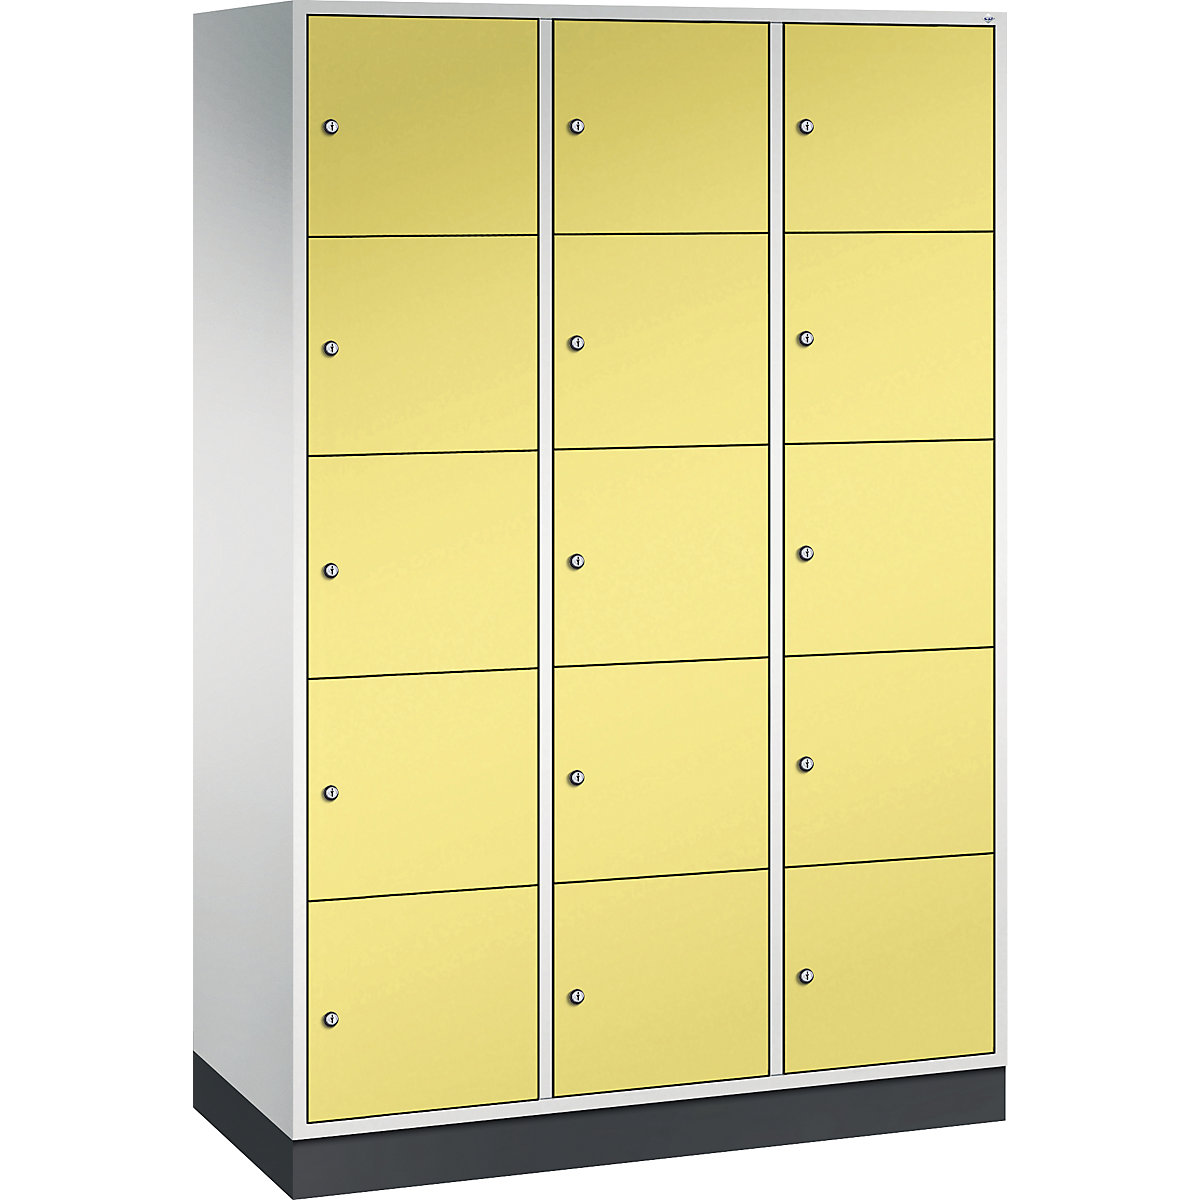 INTRO steel compartment locker, compartment height 345 mm – C+P, WxD 1220 x 500 mm, 15 compartments, light grey body, sulphur yellow doors